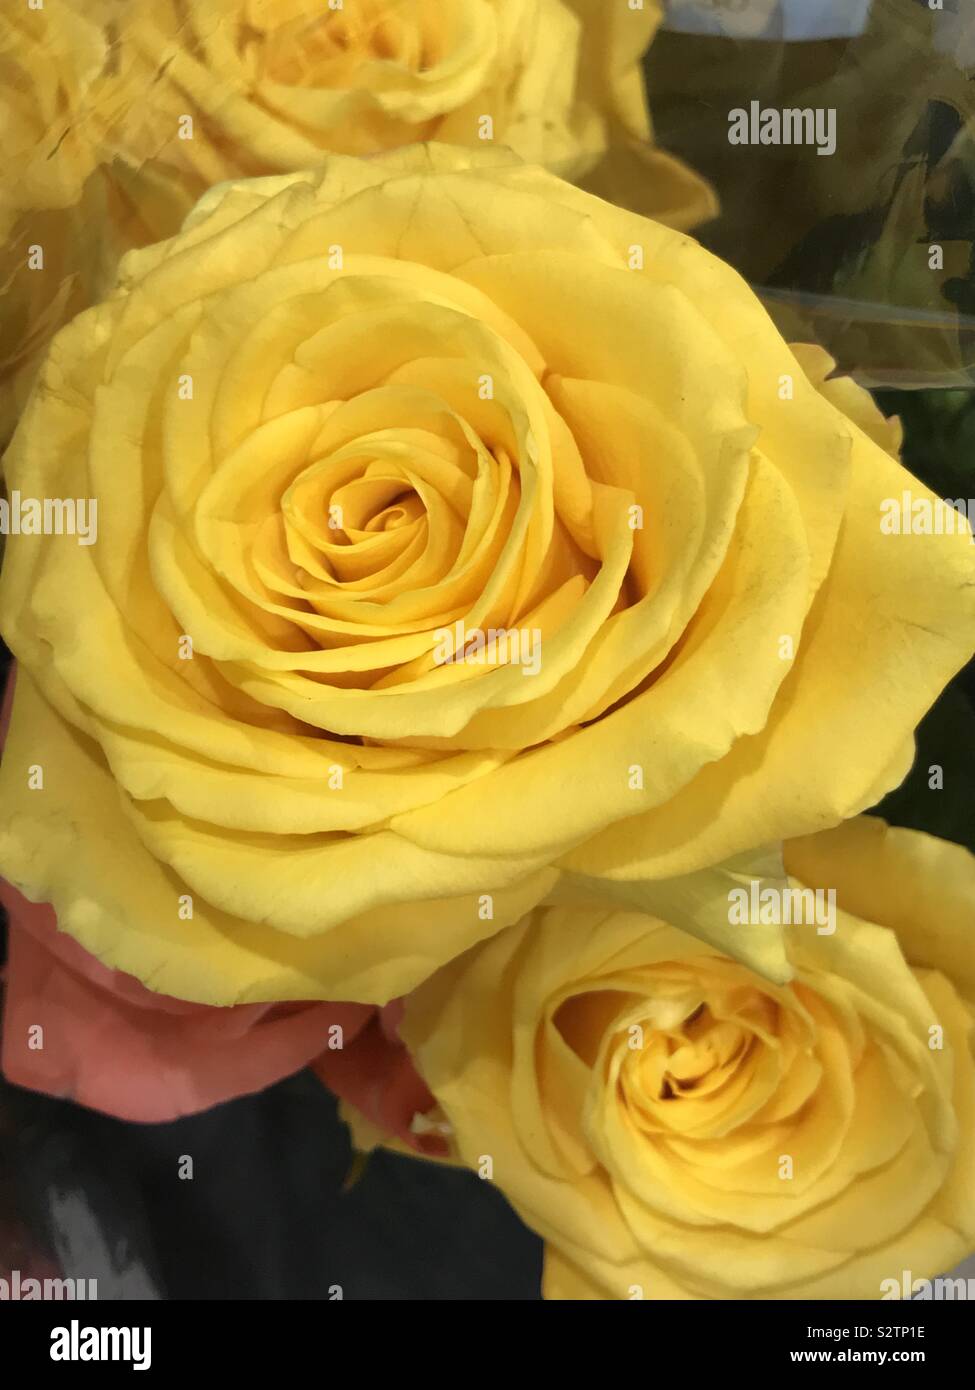 Bunch of Yellow roses Stock Photo